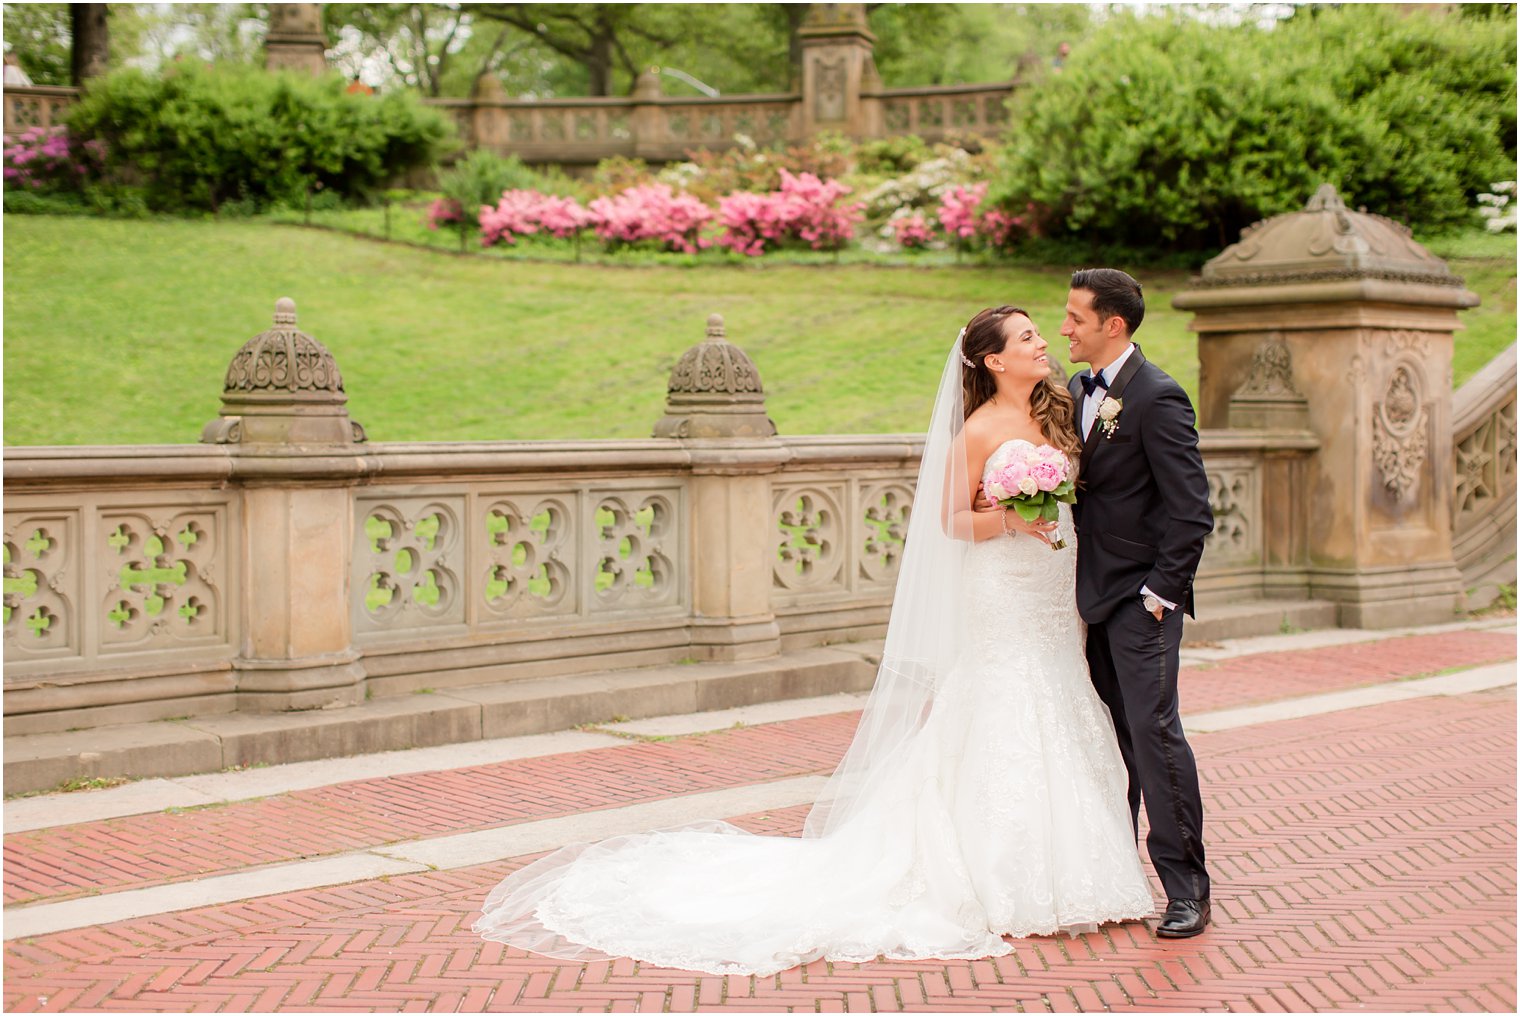 Romantic bride and groom photo in Central Park | Photo by Idalia Photography